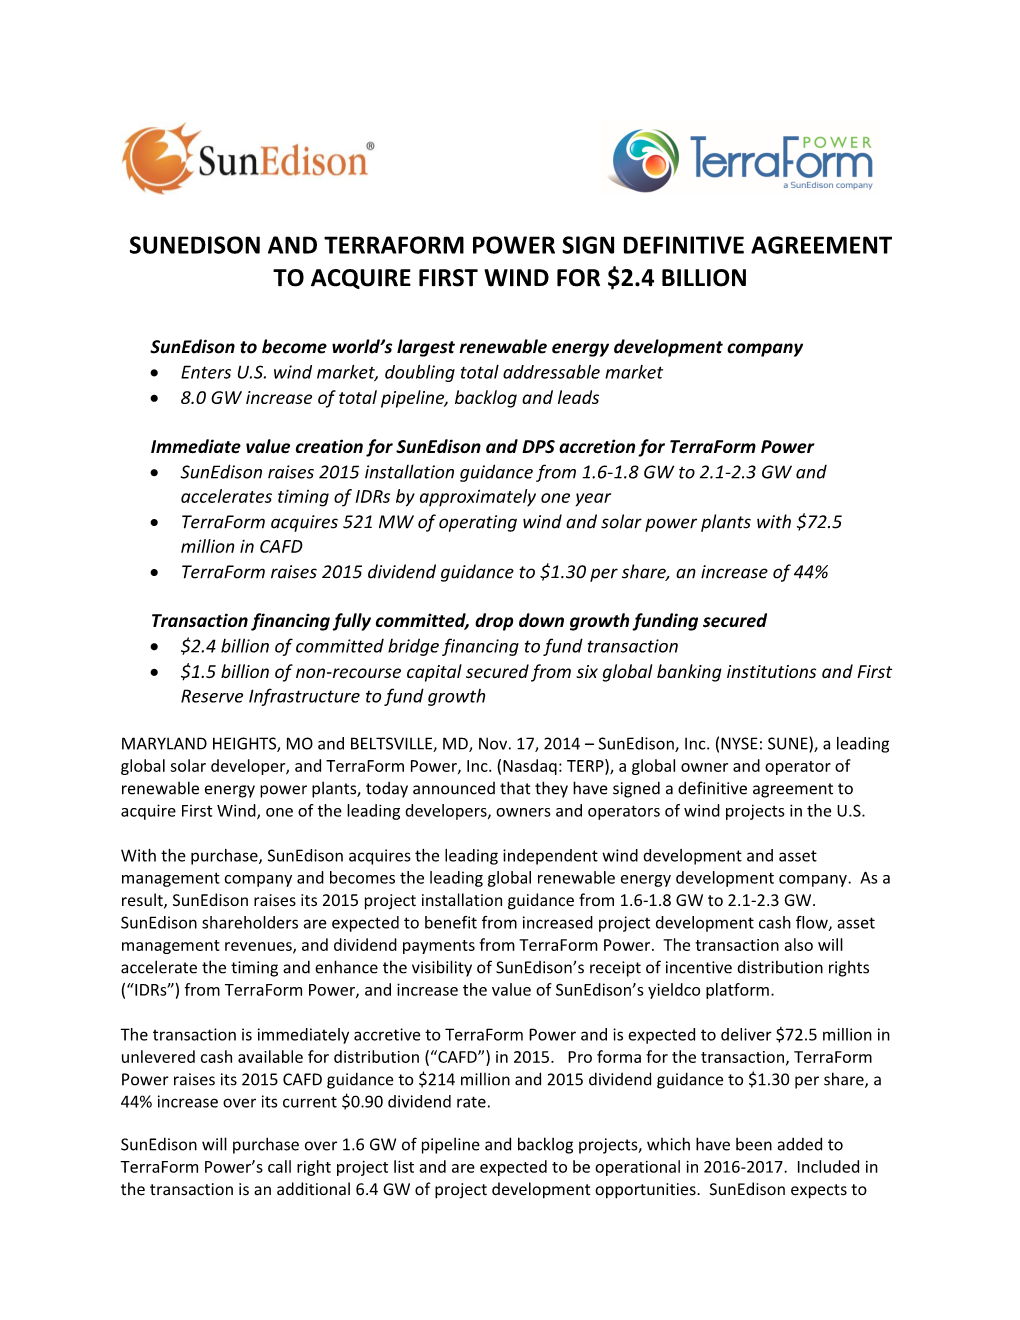 Sunedison and Terraform Power Sign Definitive Agreement to Acquire First Wind for $2.4 Billion